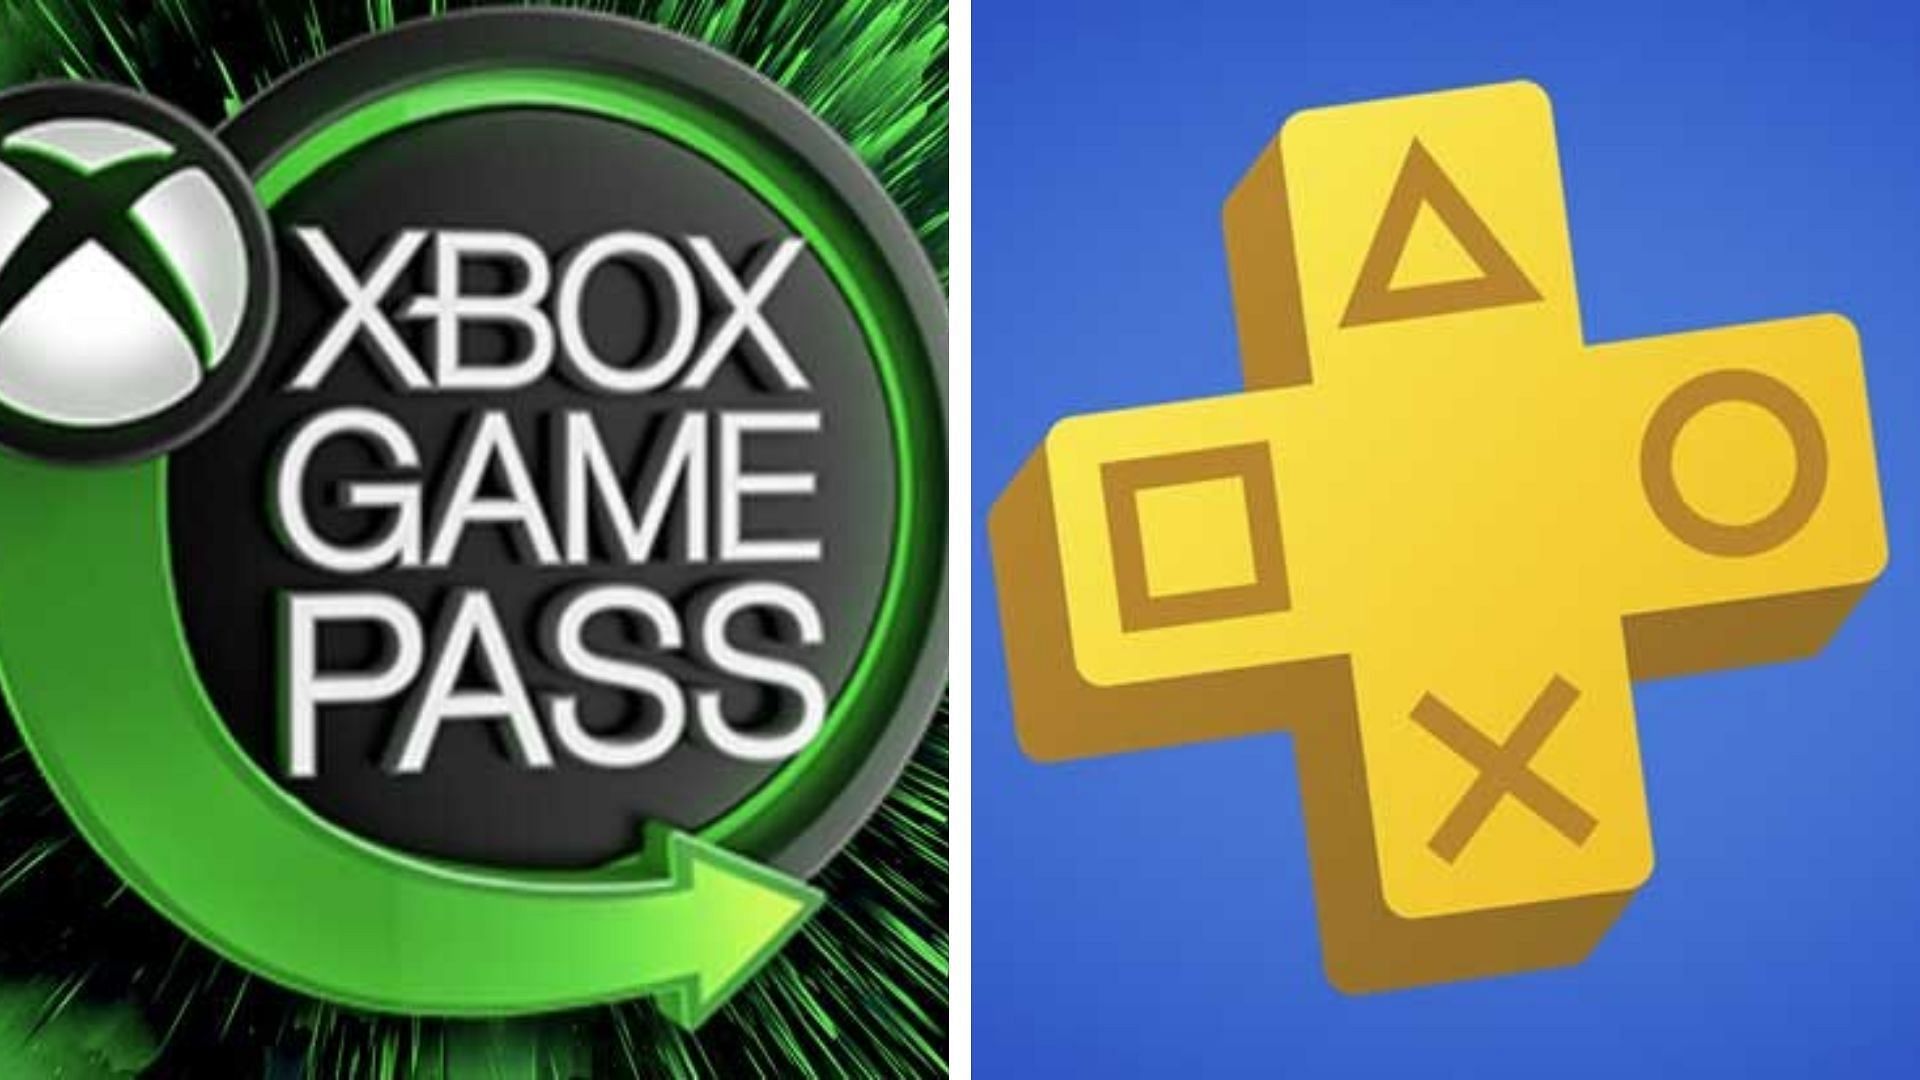 PS Plus and Xbox Game Pass are among the most popular monthly services today (Image via Microsoft and Sony)